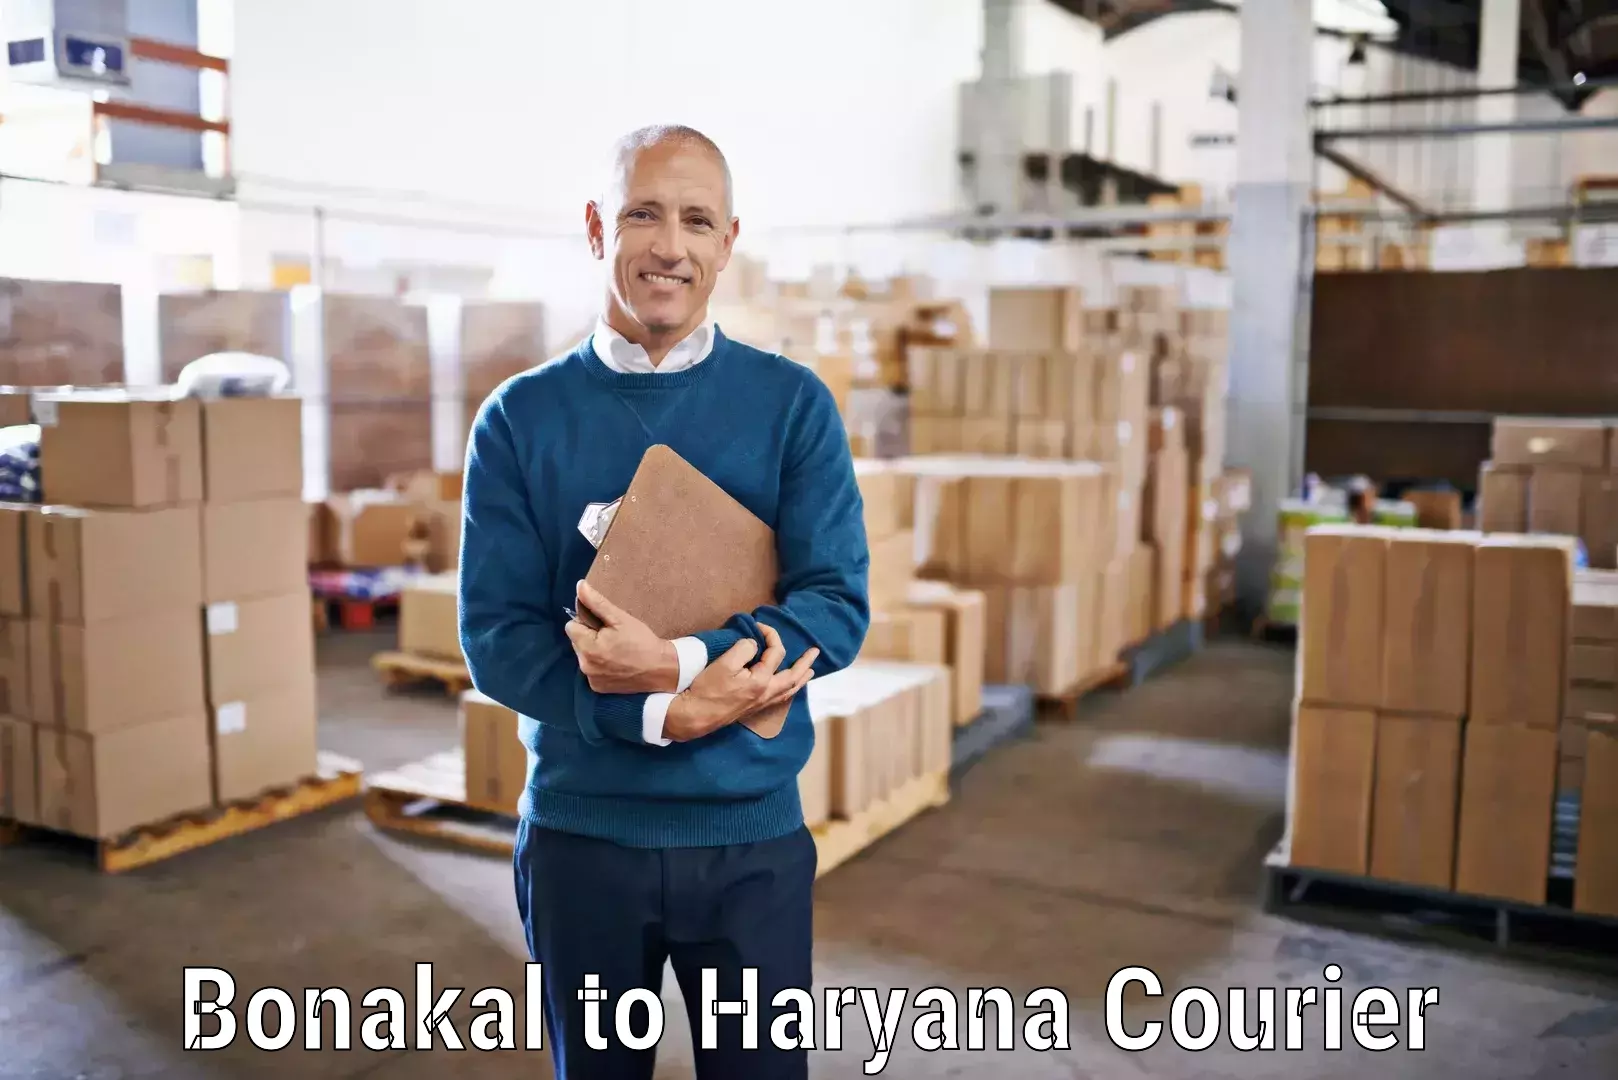 On-call courier service Bonakal to NCR Haryana